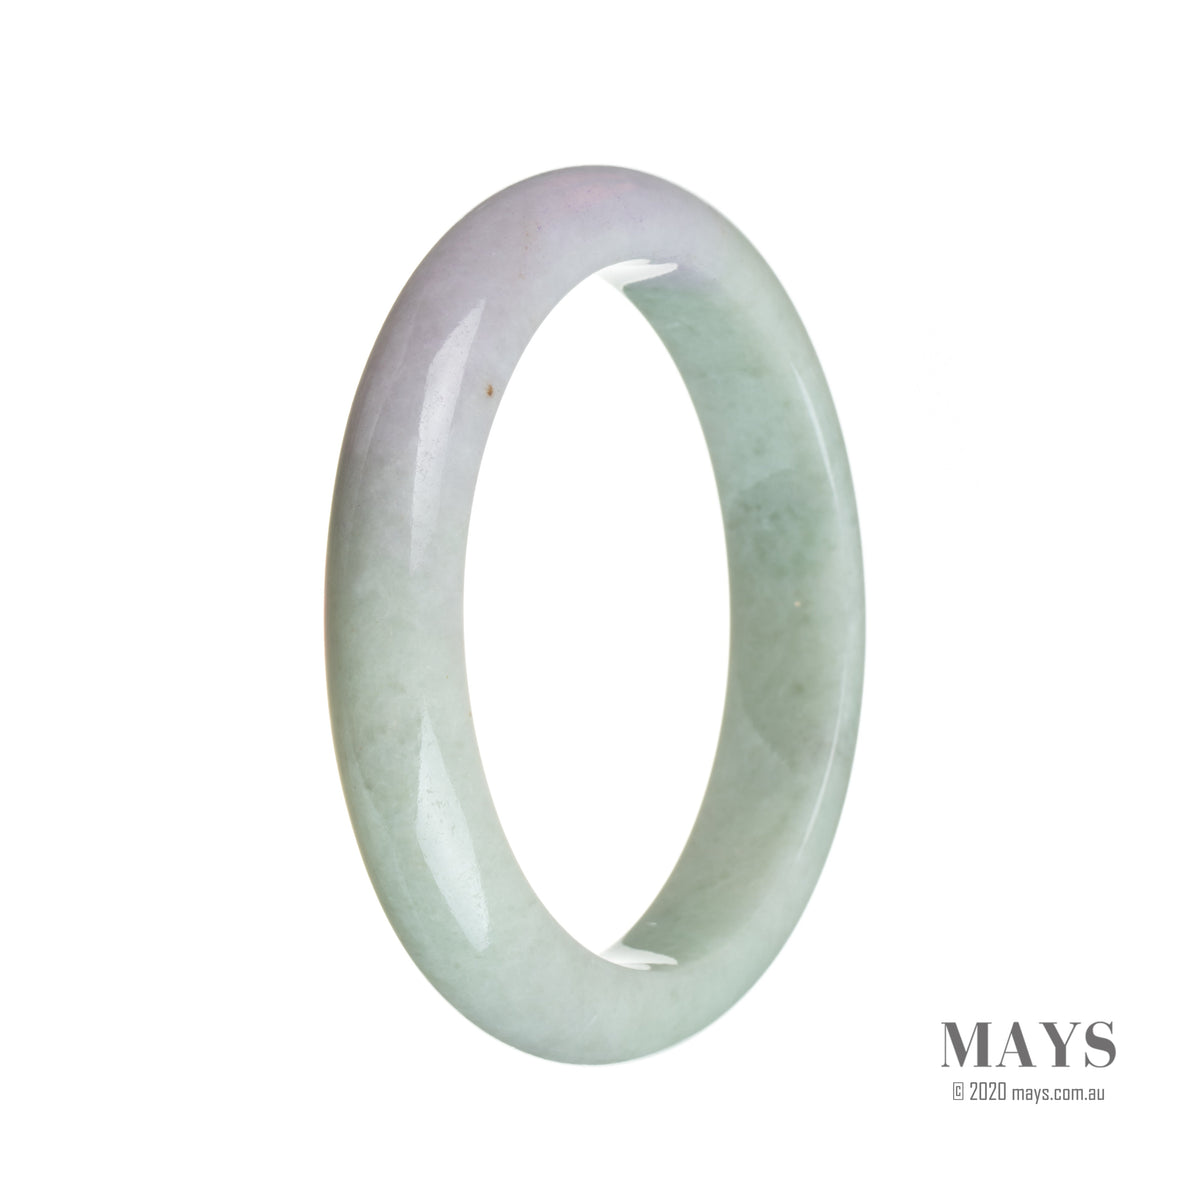 An elegant lavender and green jadeite bracelet, made of genuine Grade A stones. The bracelet features a semi-round design, with a diameter of 58mm. Perfect for adding a touch of natural beauty to any outfit.